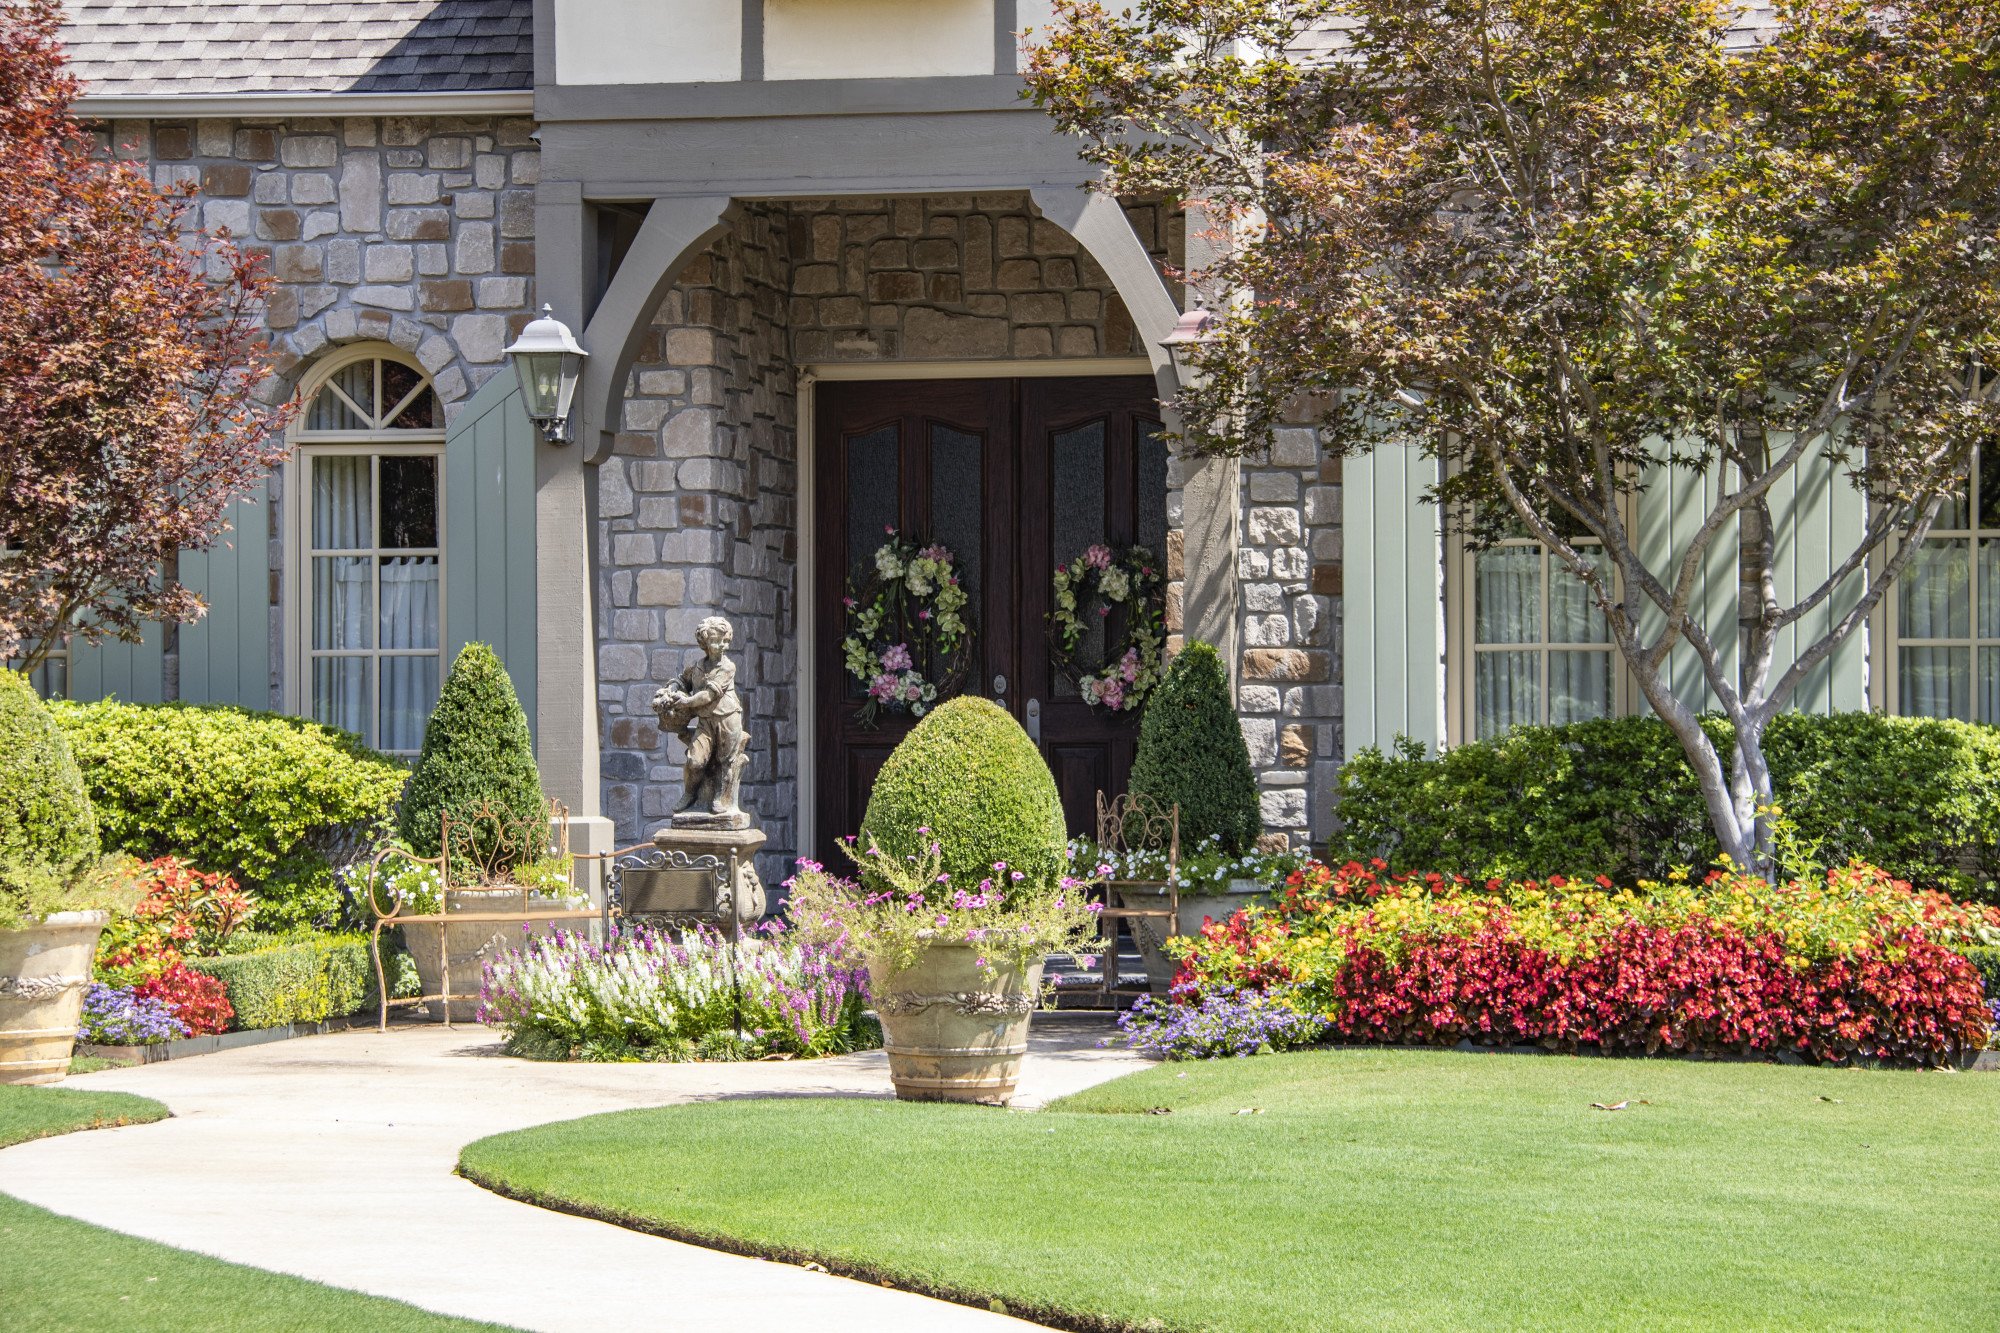 If your front yard is looking a bit shabby it's probably time to update it - but how? Well, here are four cheap and simple front yard landscaping ideas,